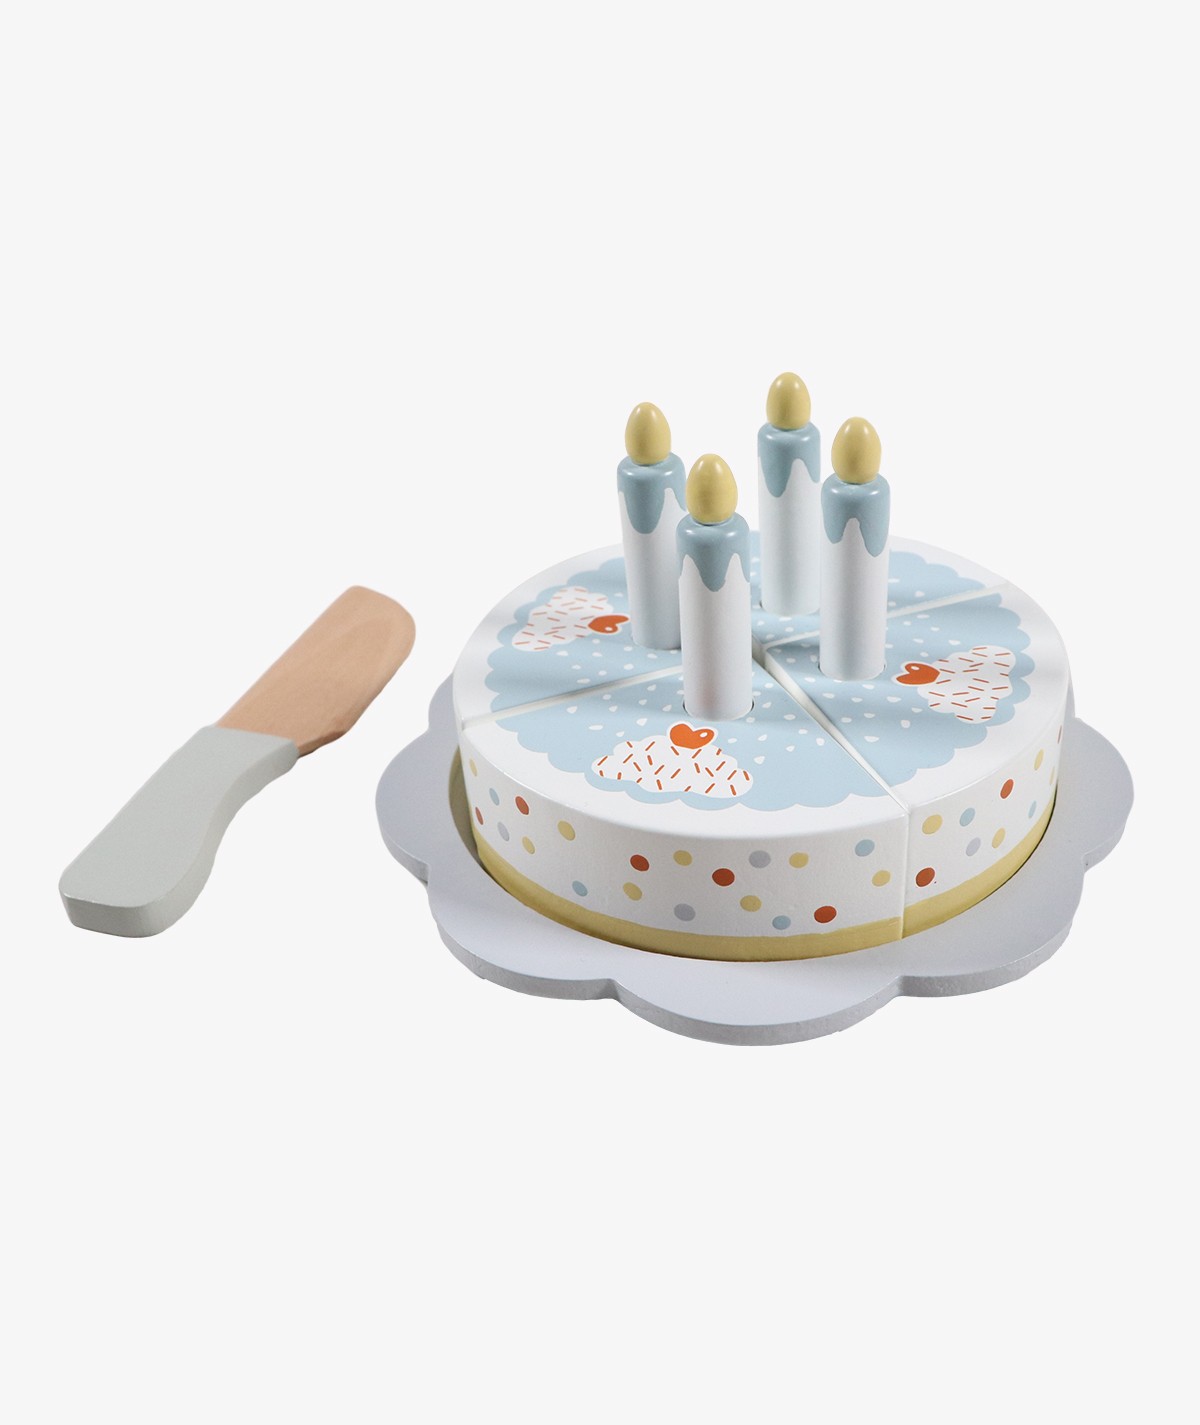 Wooden Cake Toy